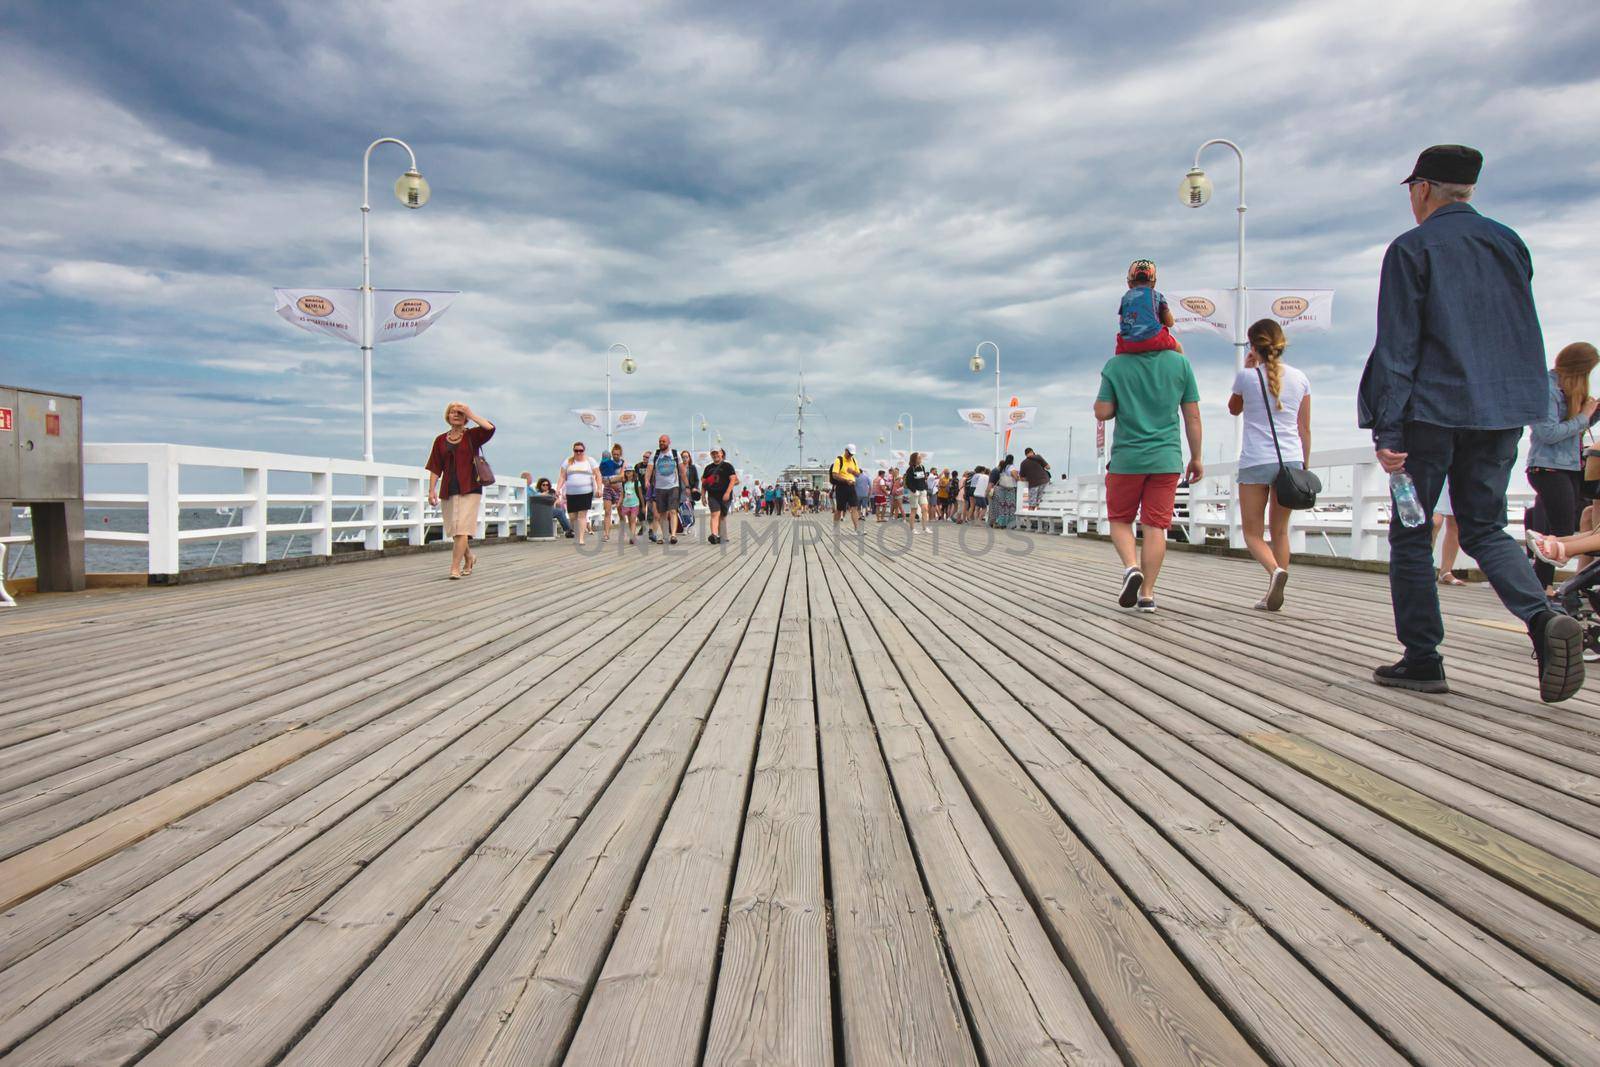 Sopot / Croatia - August 3 2019: People walking on the wooden boards of the pier at Sopot beach